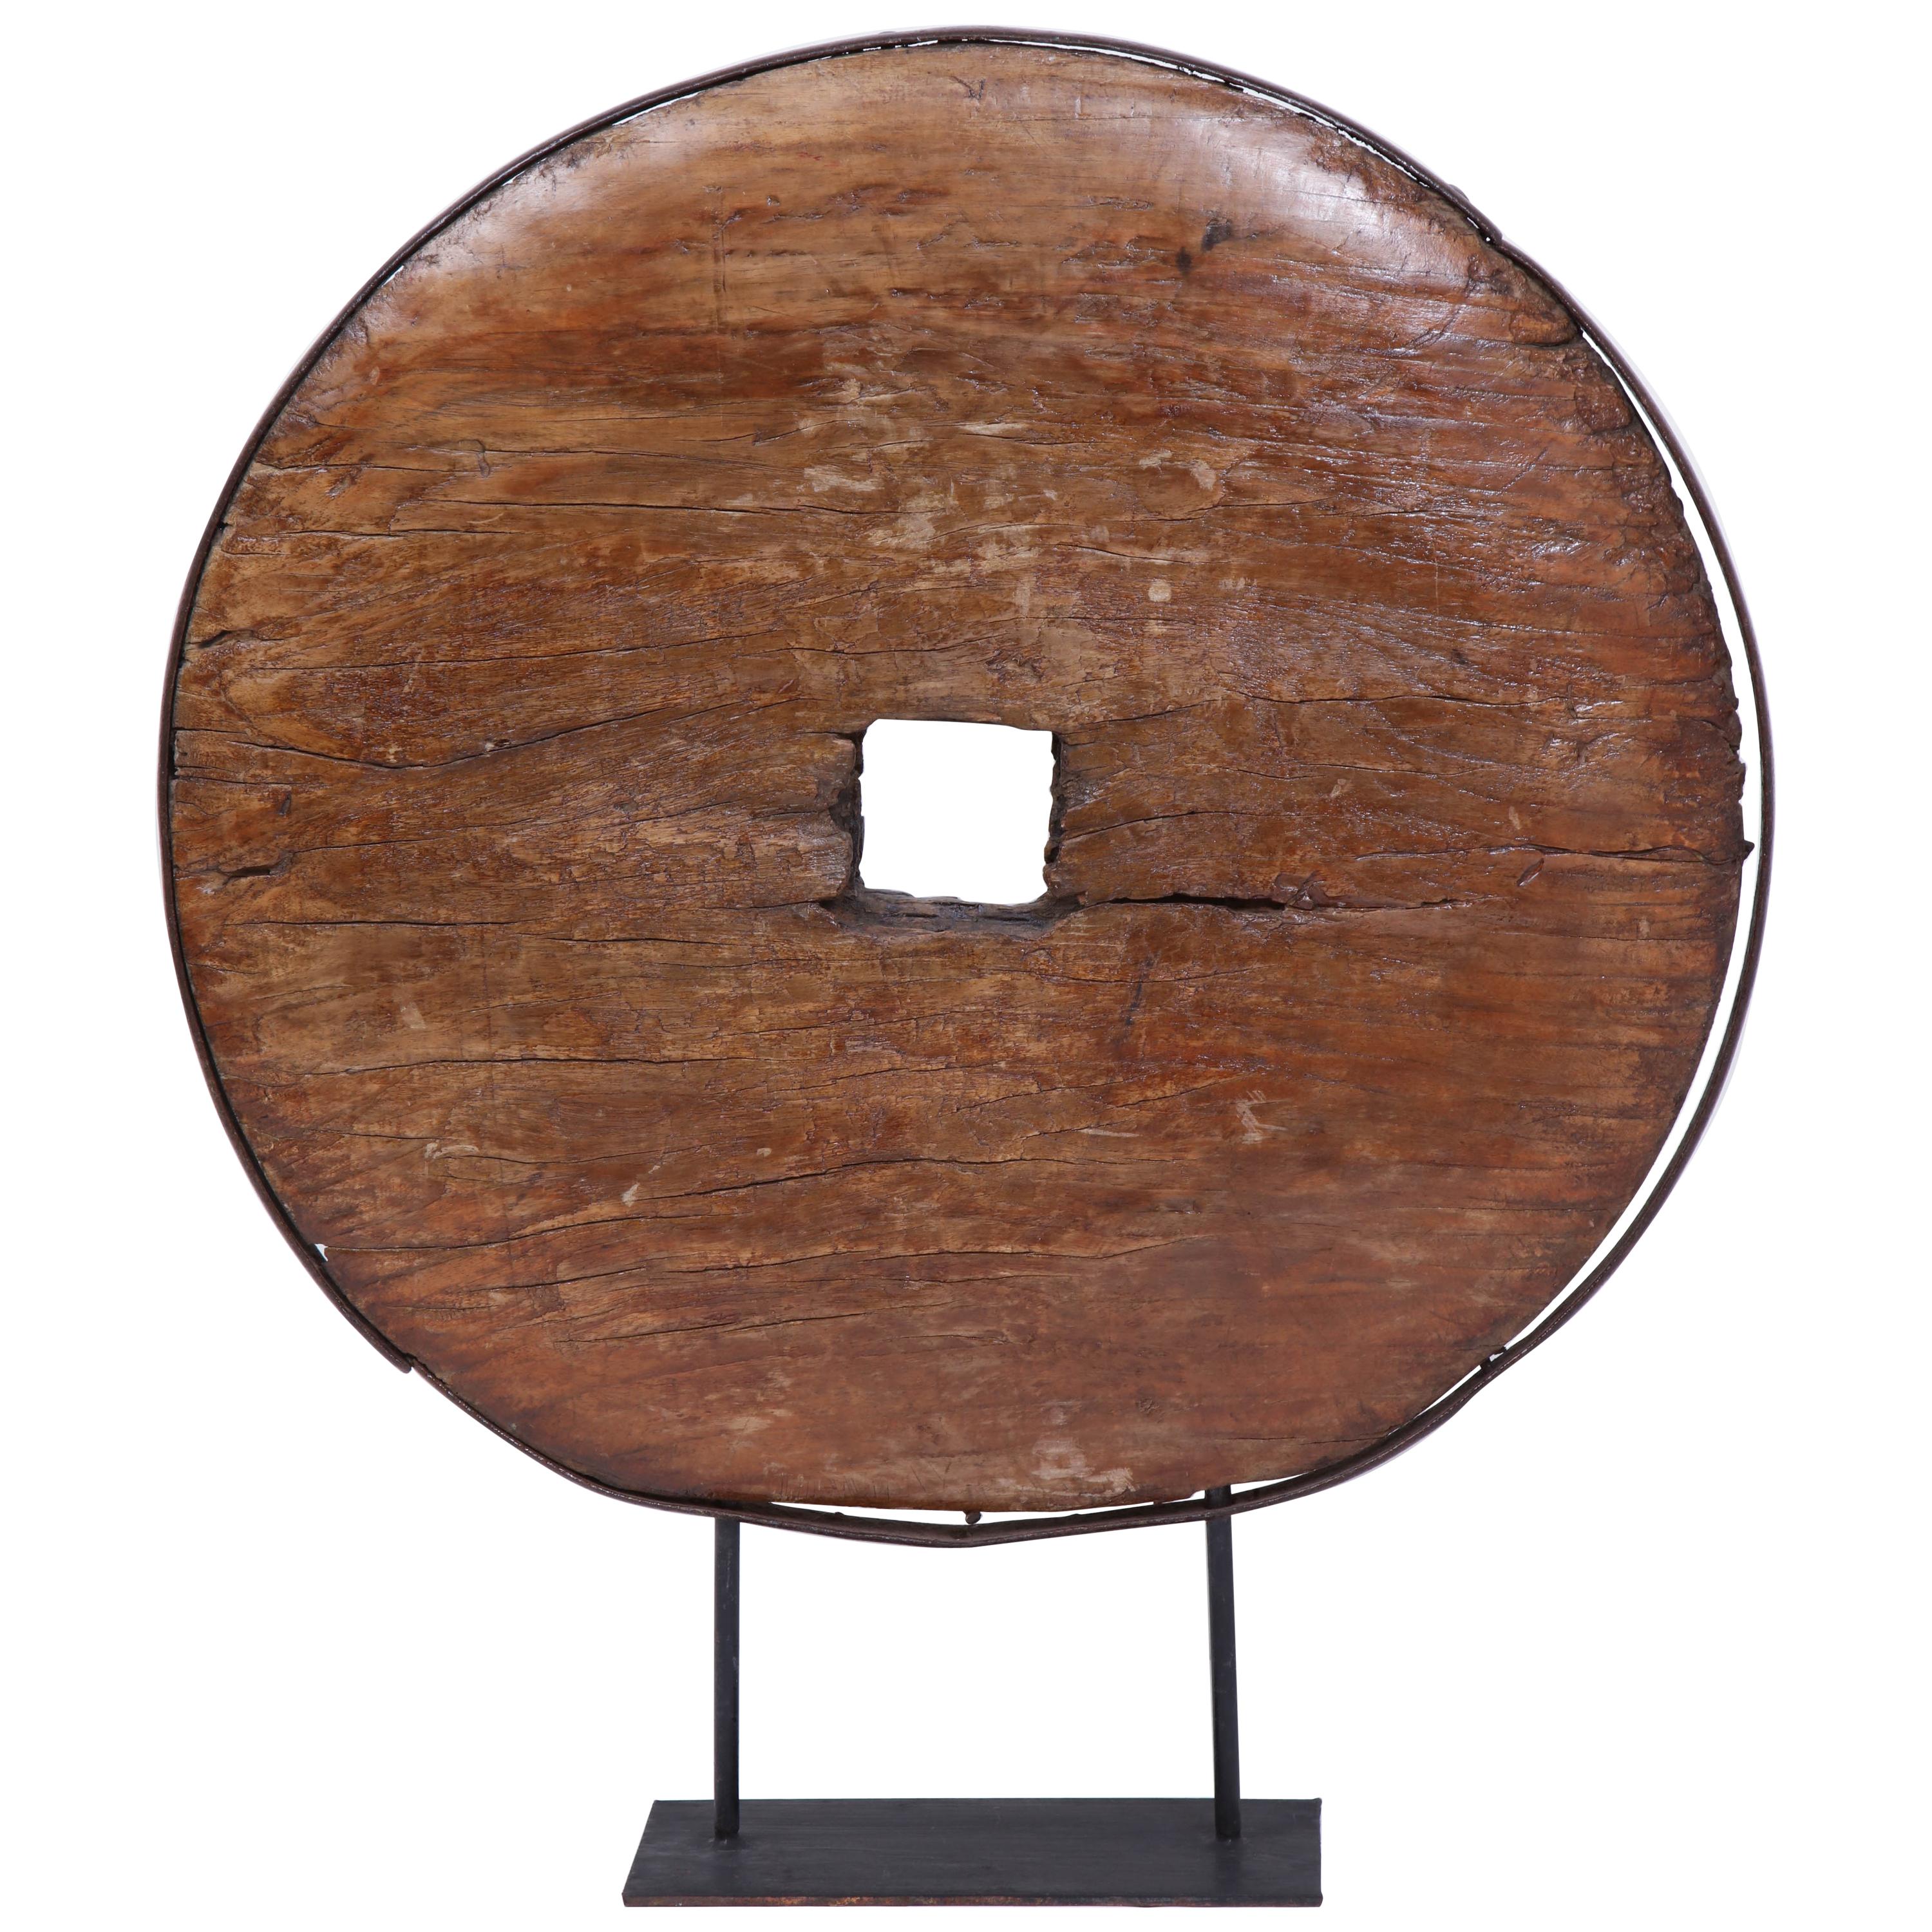 Early 18th Century Large African Wheel For Sale